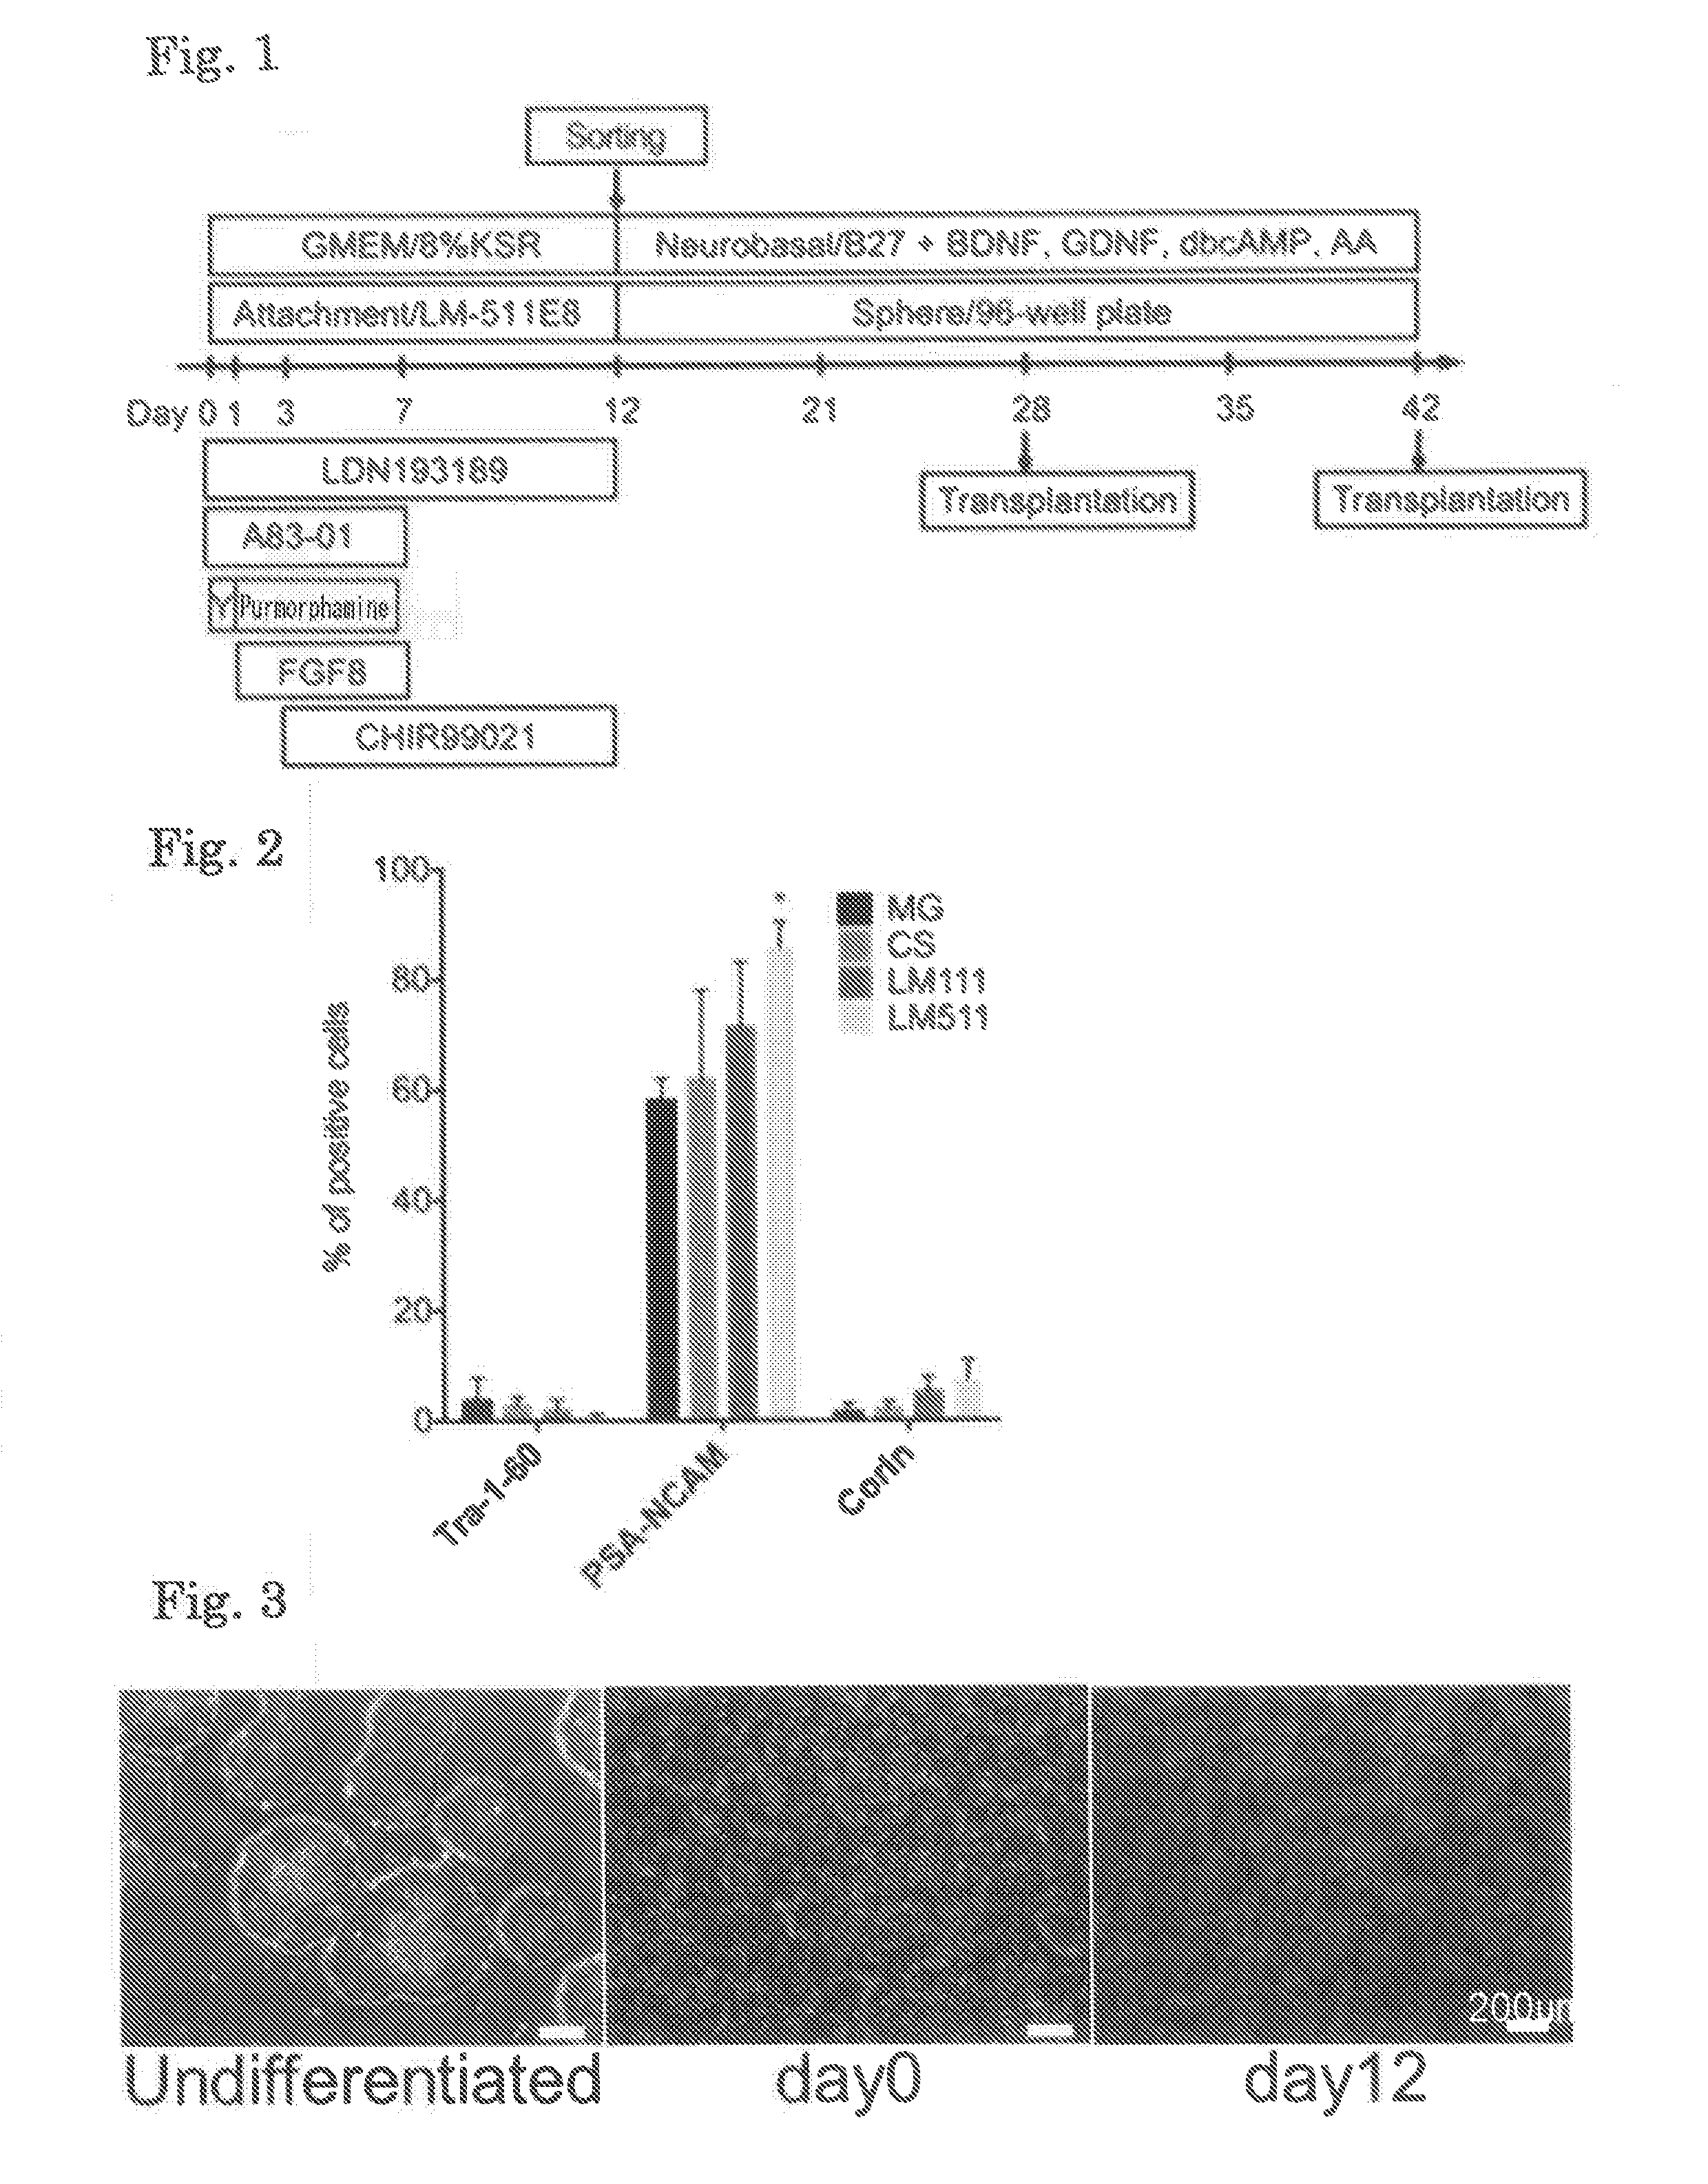 Method for inducing dopaminergic neuron progenitor cells